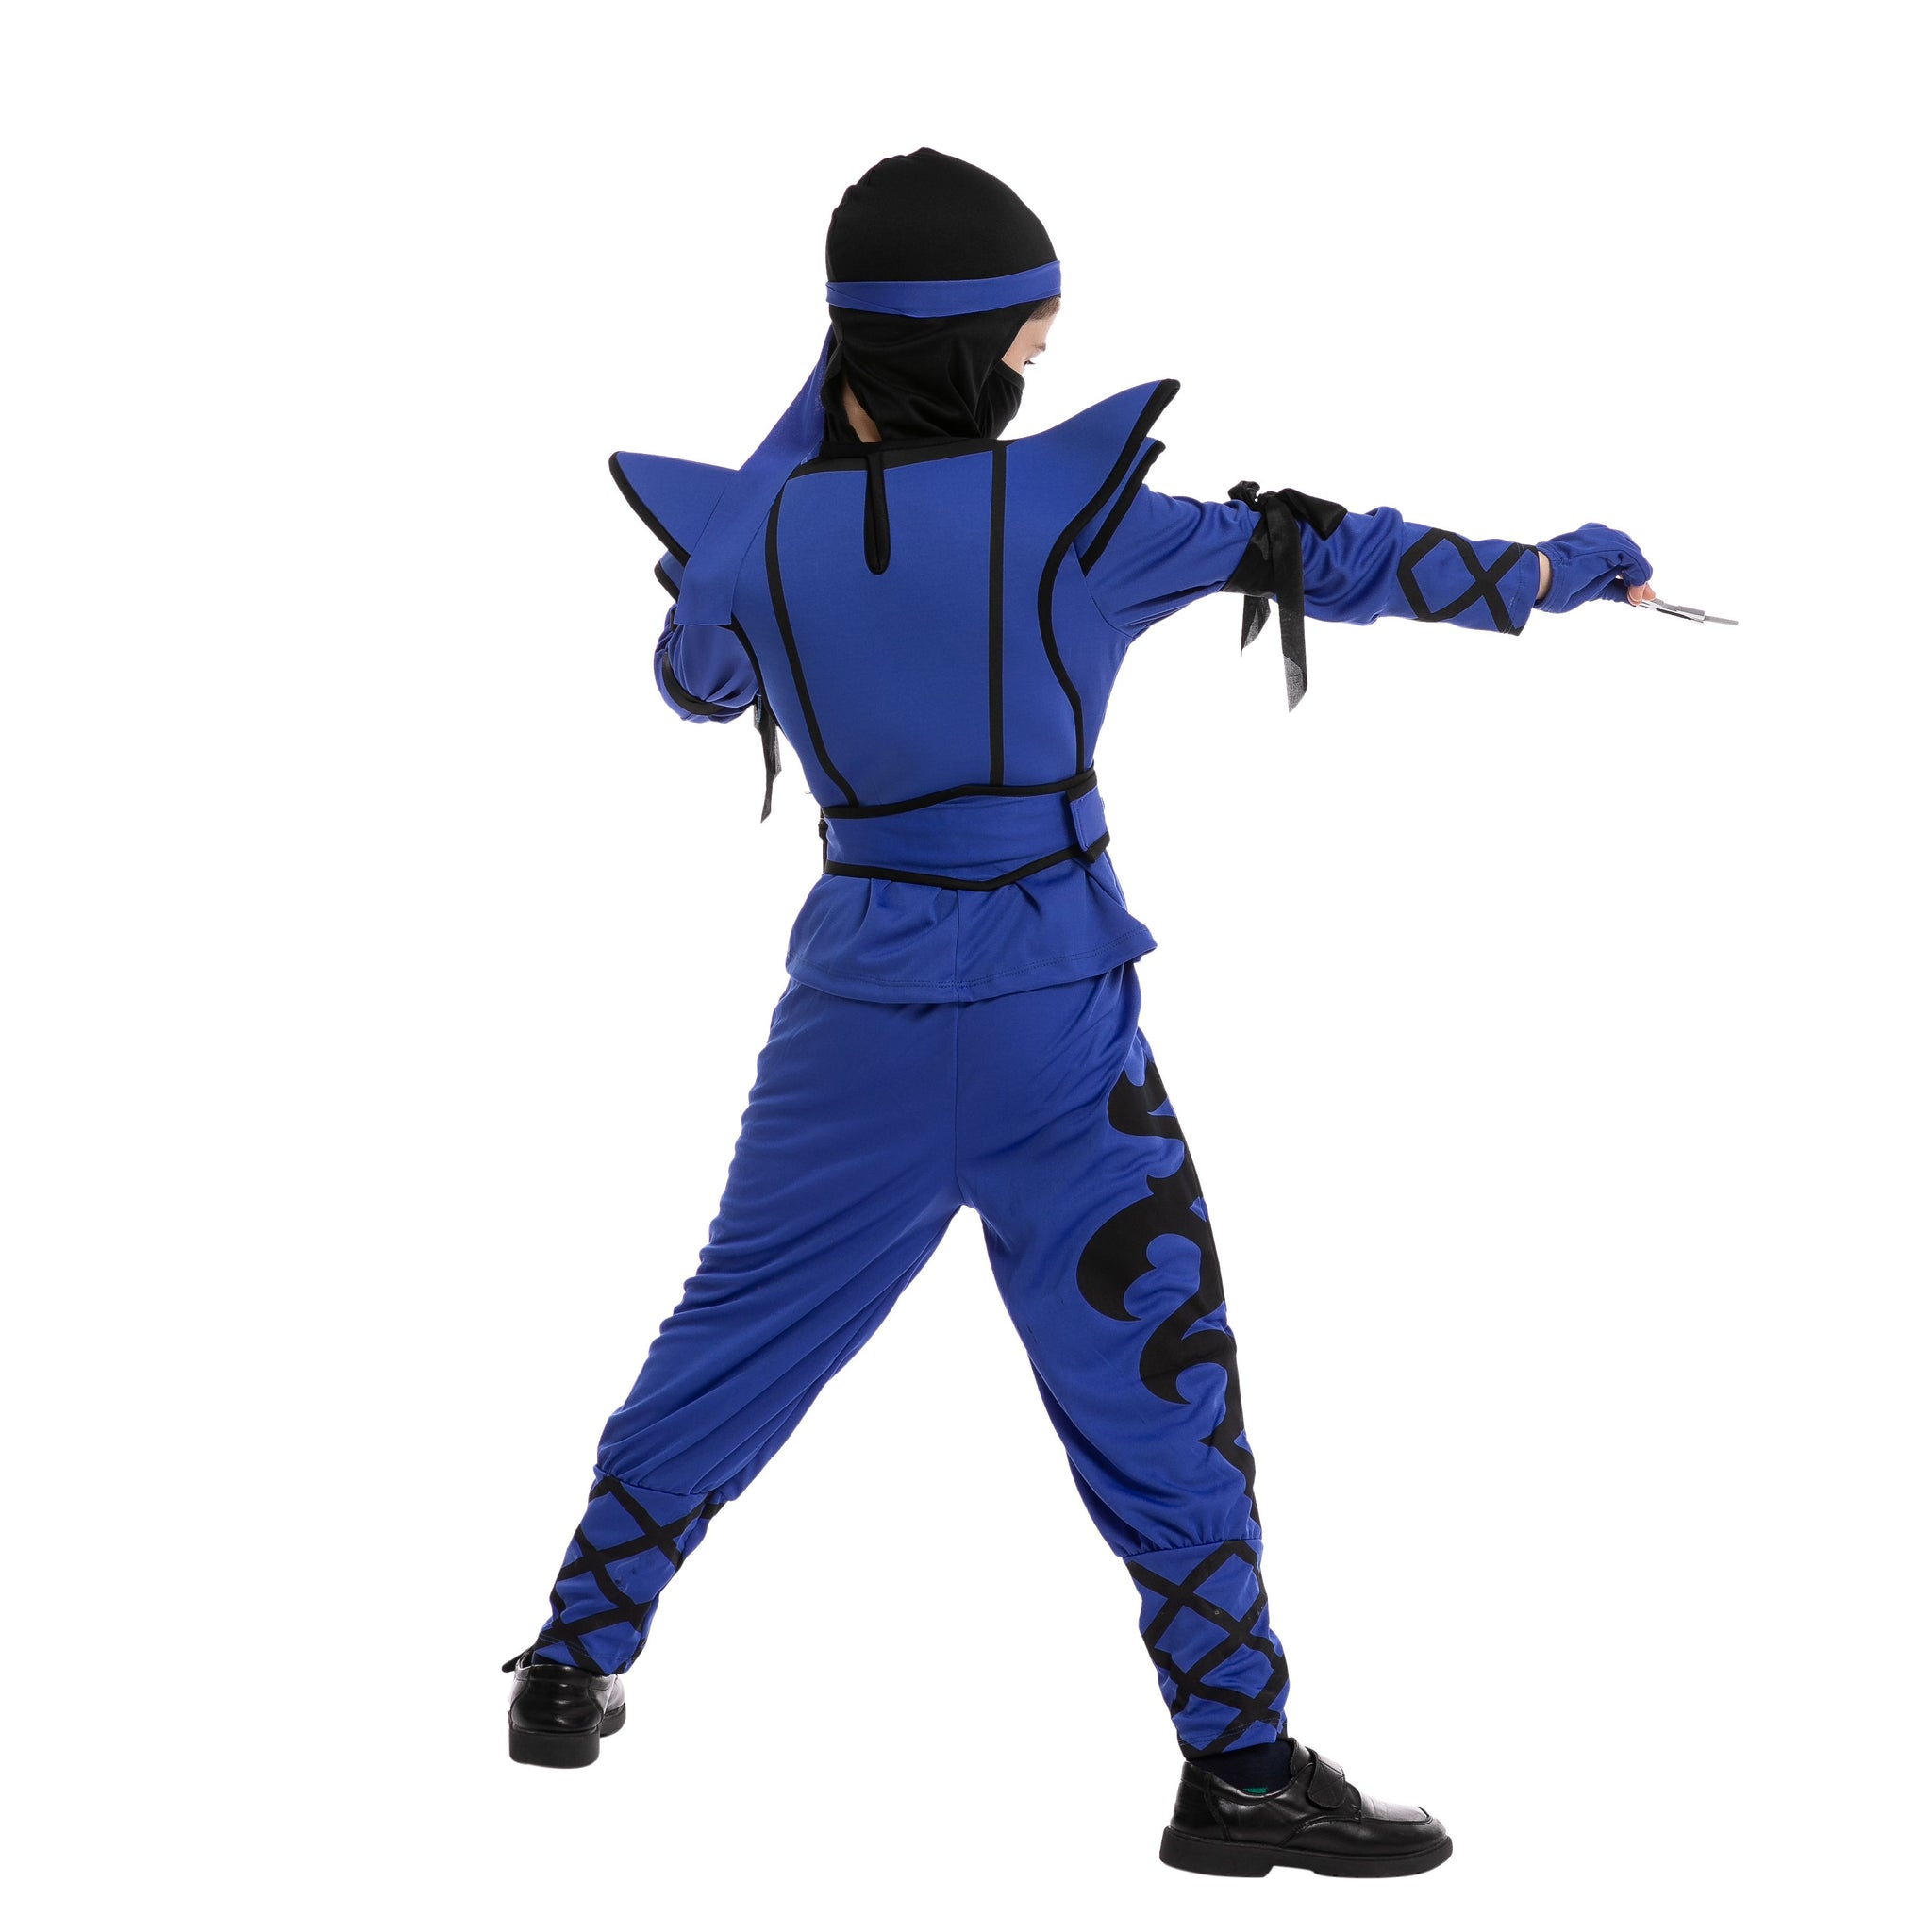 Syncfuns Kids Birdy Blue Ninja Costume with Accessories for Boys